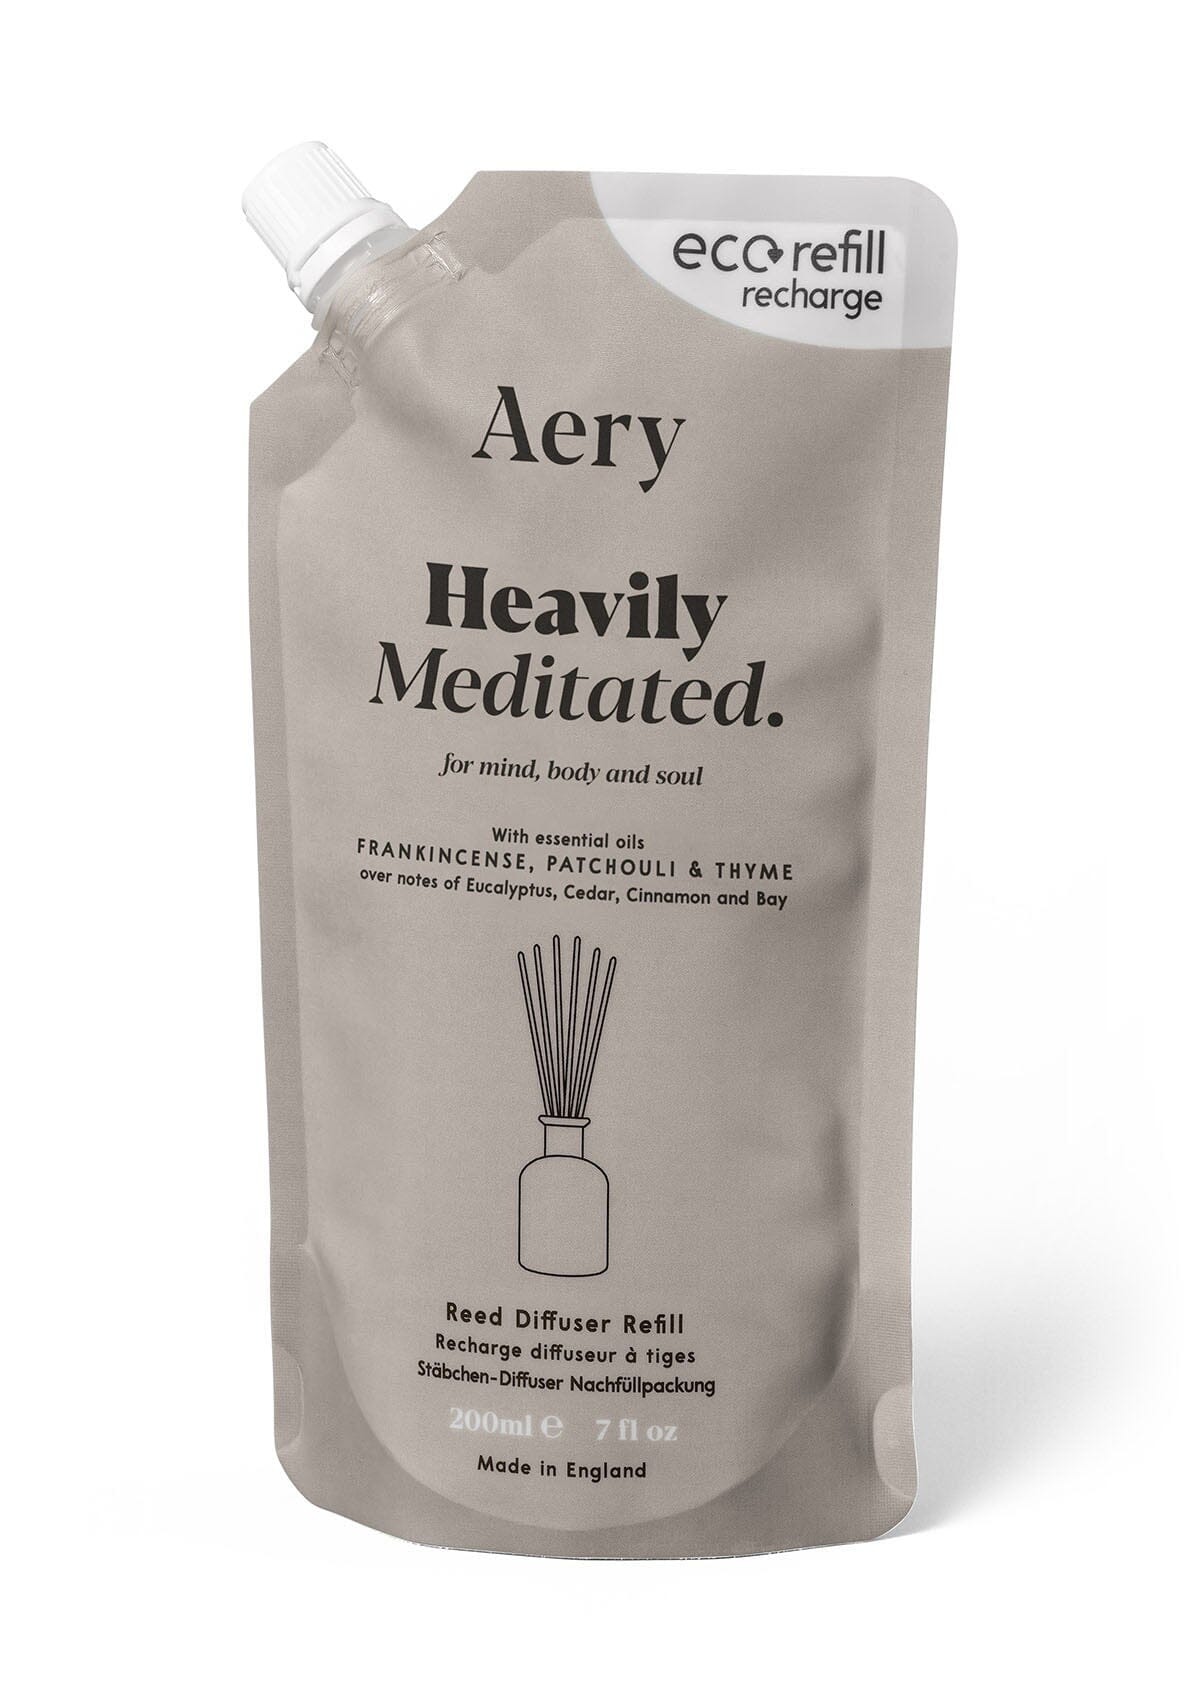 Beige Heavily Meditated reed diffuser refill pouch by aery displayed on white background 